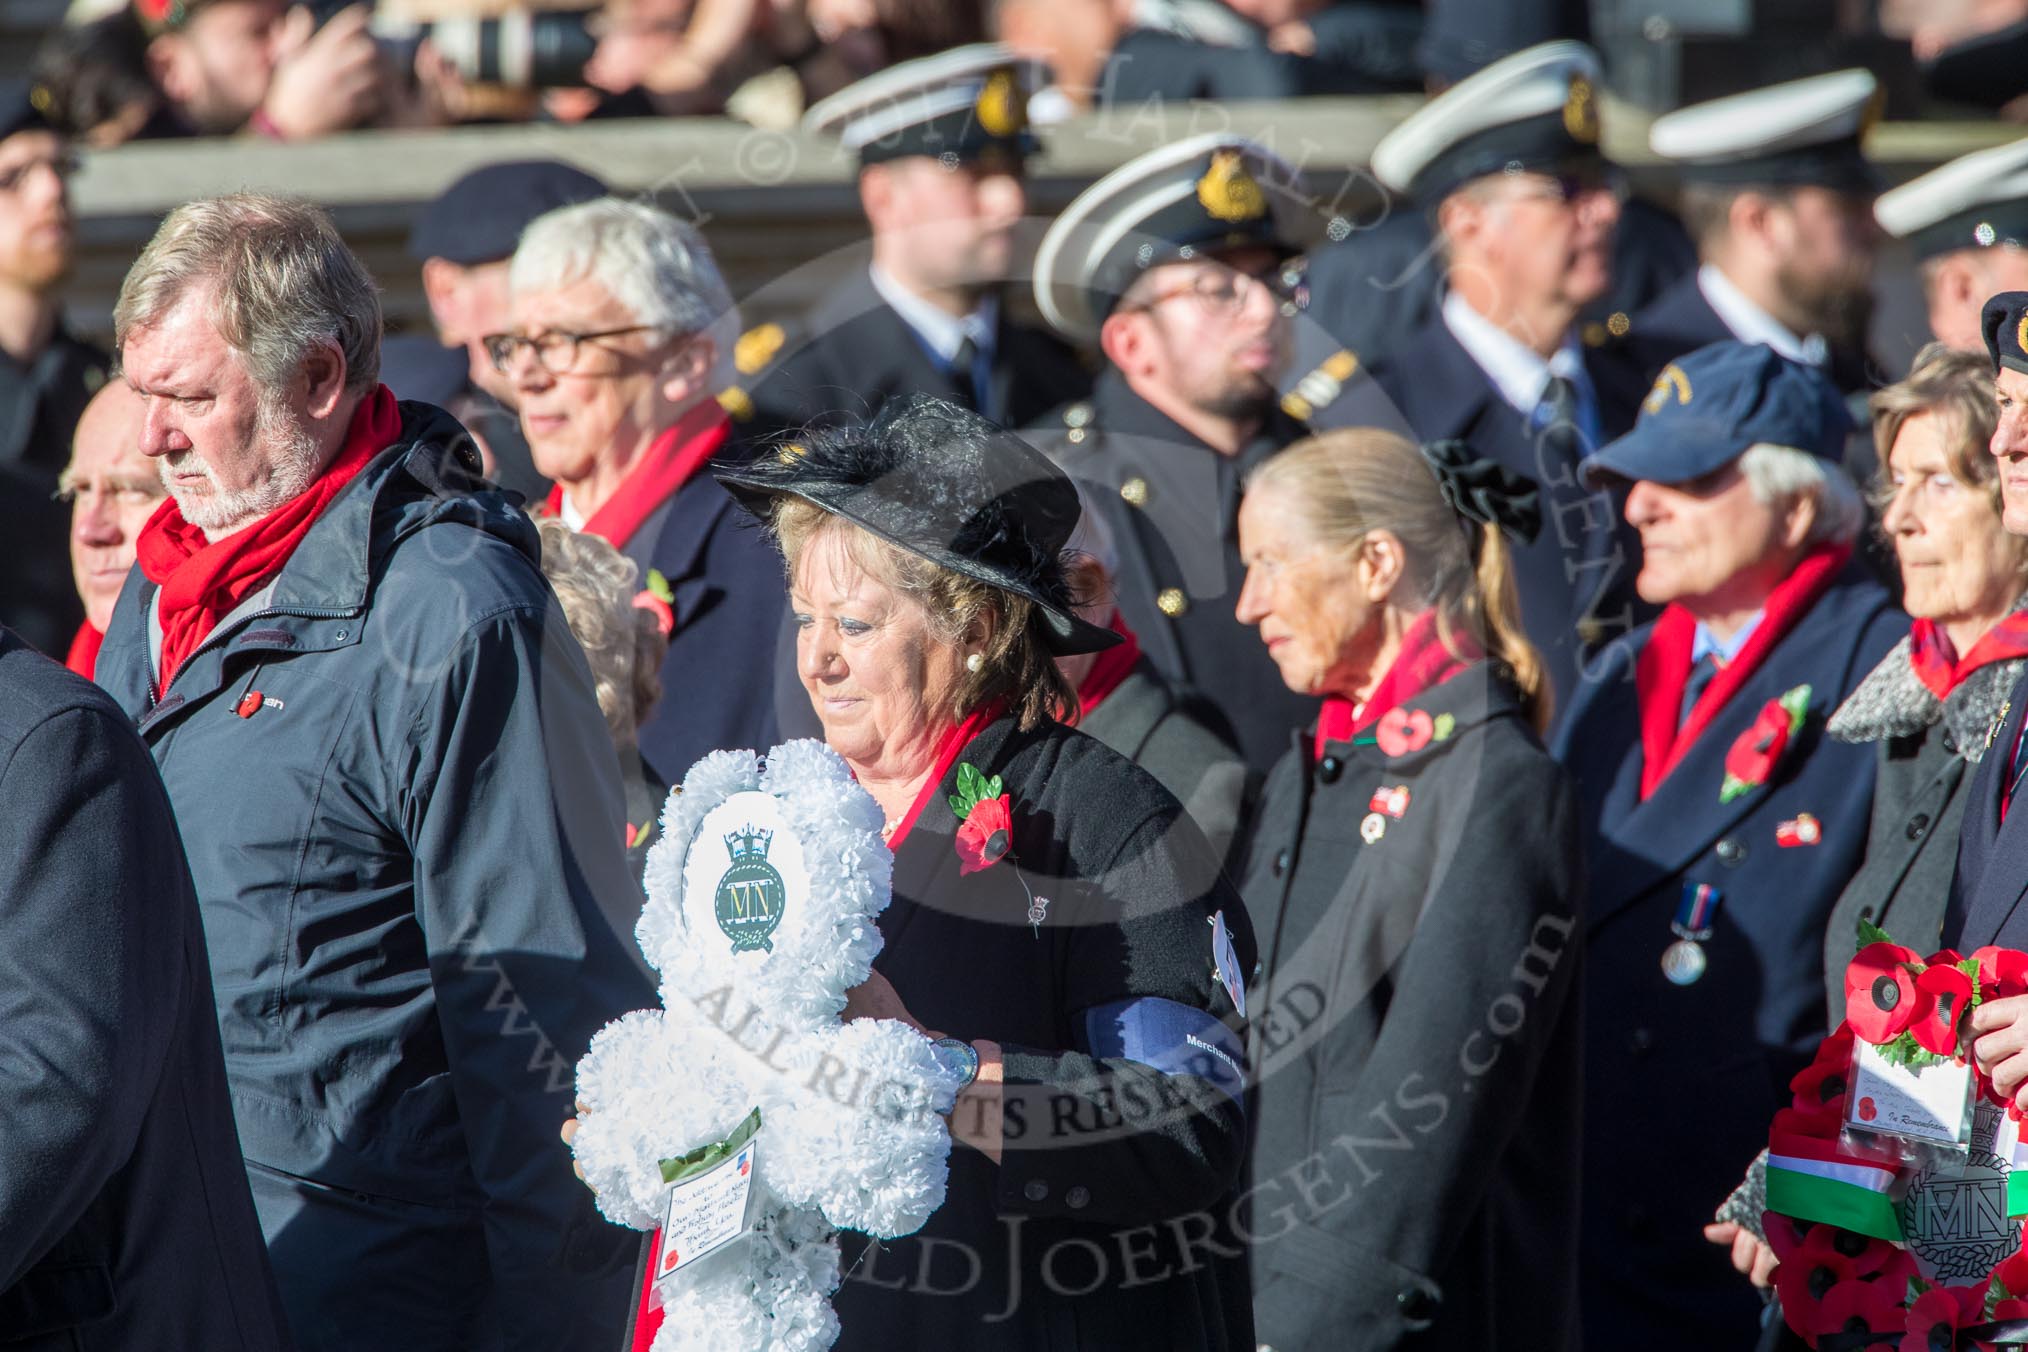 Merchant Navy Association  (Group E3, 40 members) during the Royal British Legion March Past on Remembrance Sunday at the Cenotaph, Whitehall, Westminster, London, 11 November 2018, 11:41.